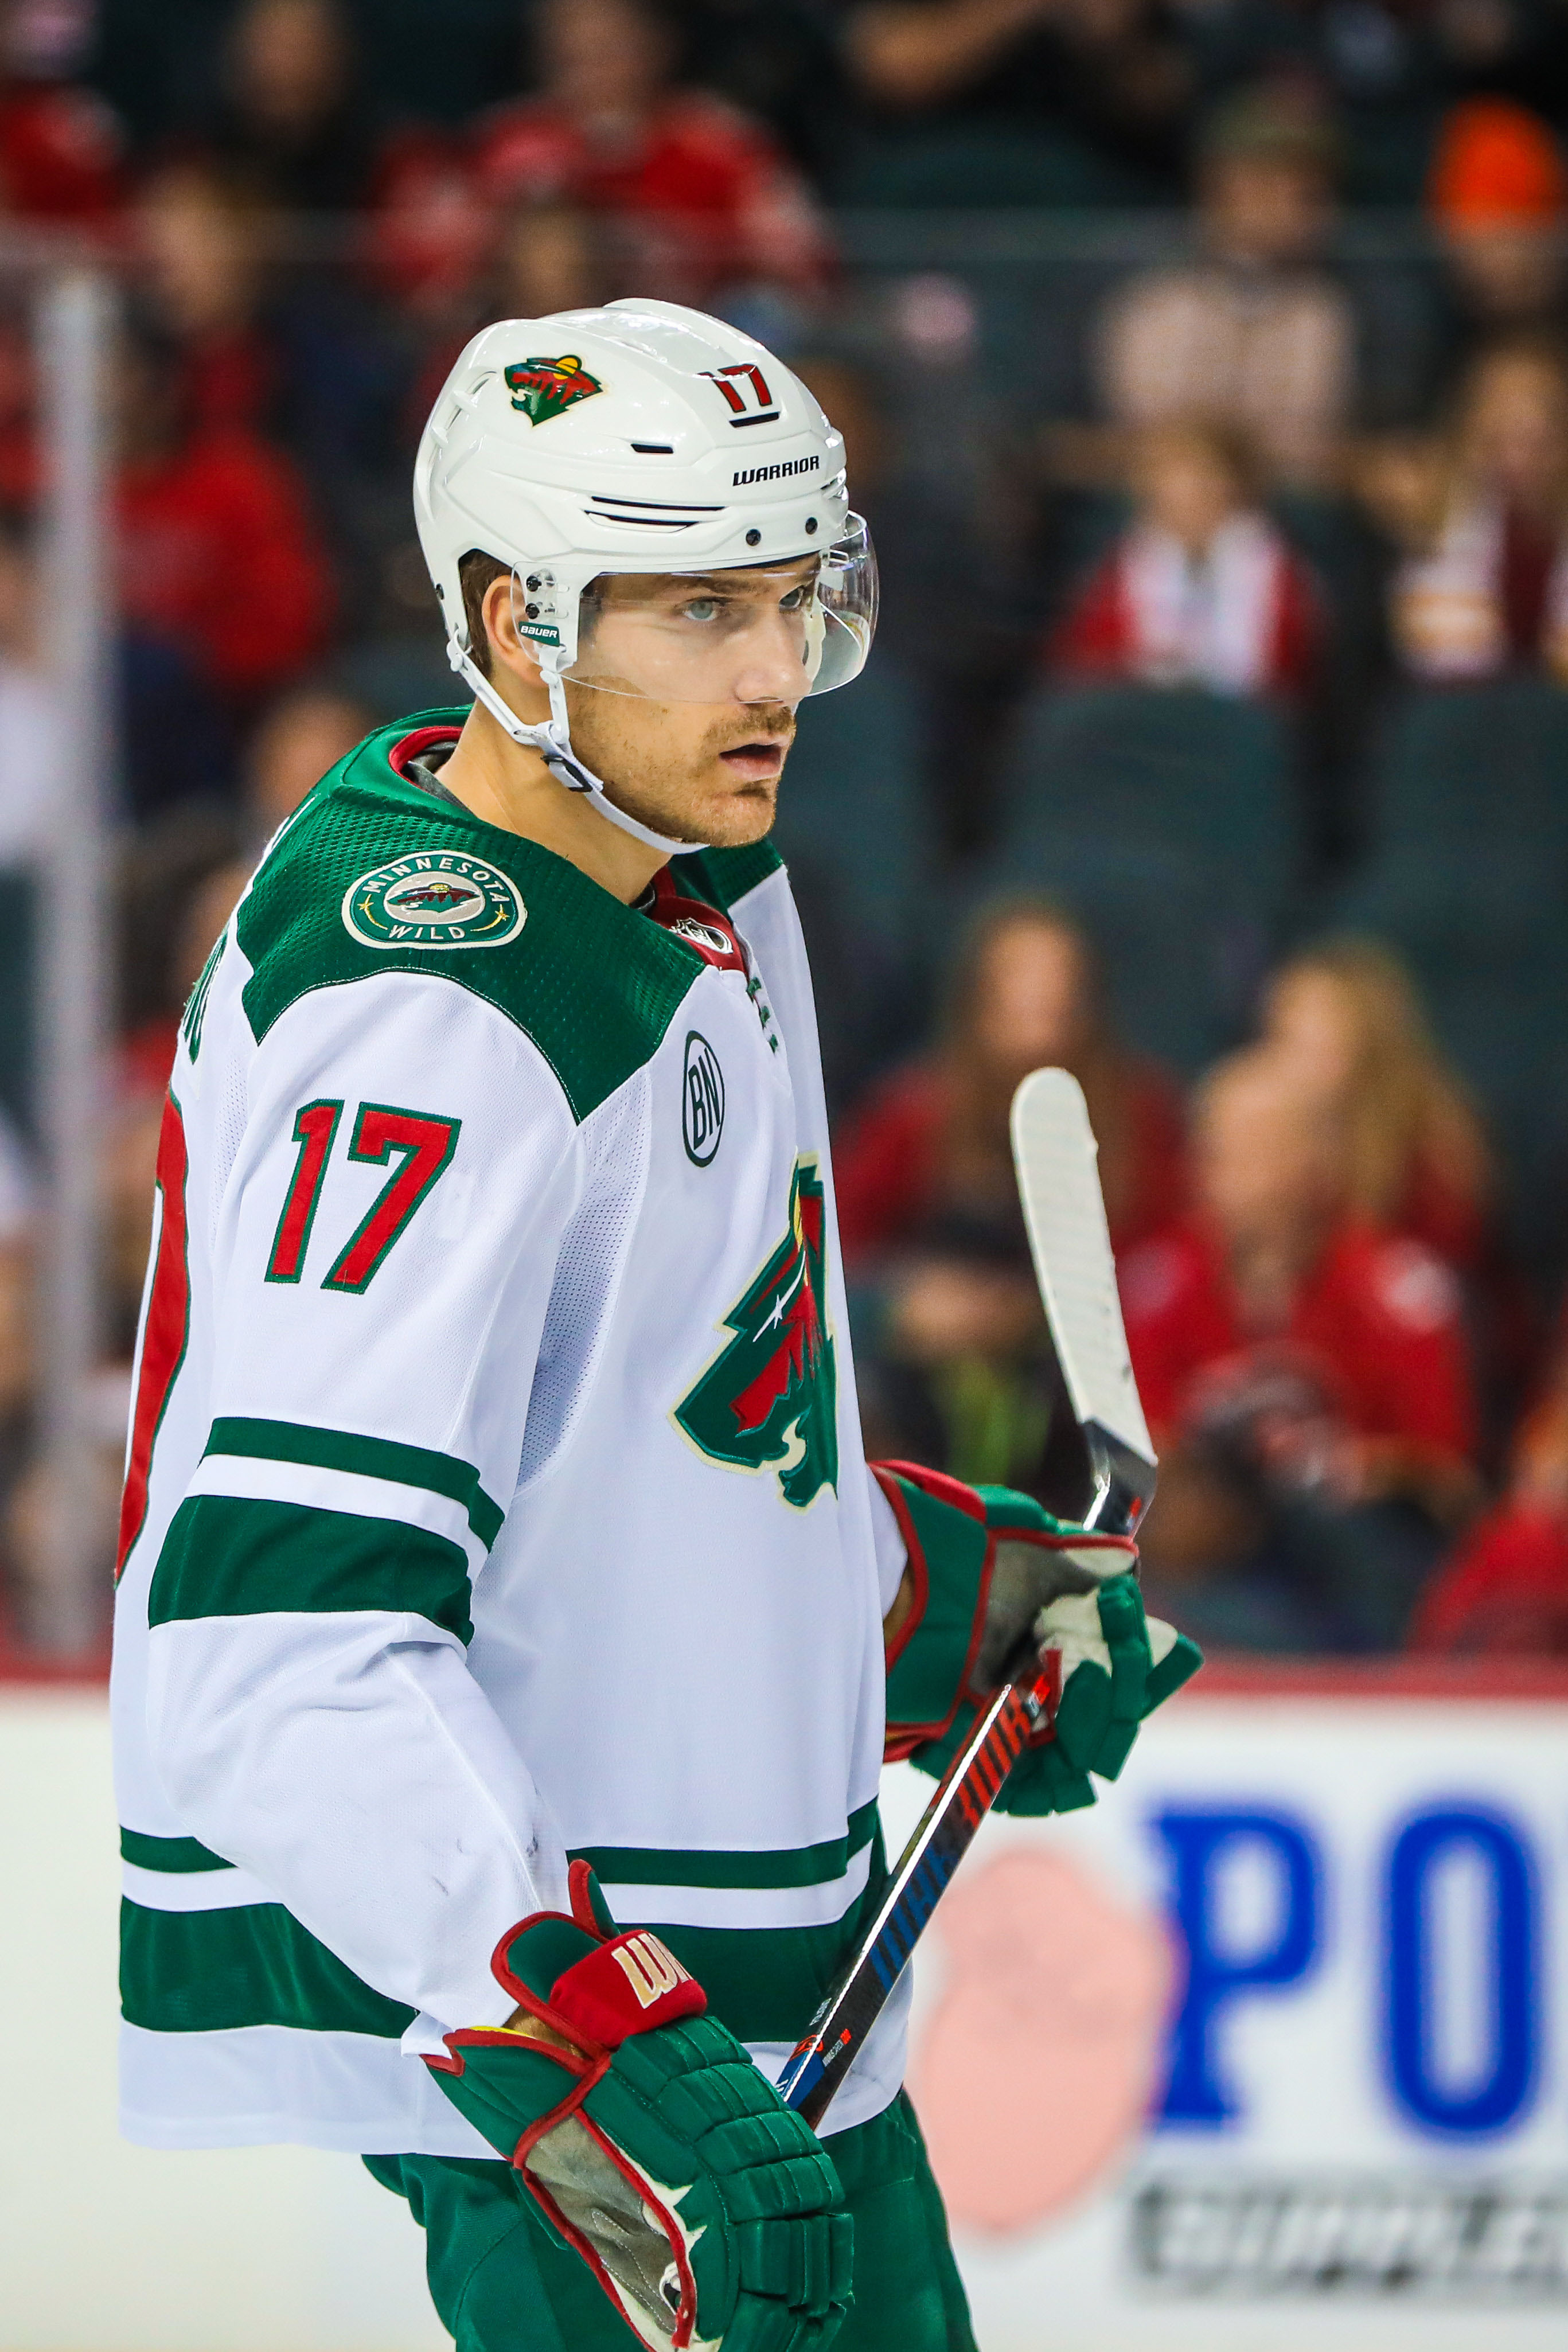 Foligno signs 4-year, $16 million contract with Wild